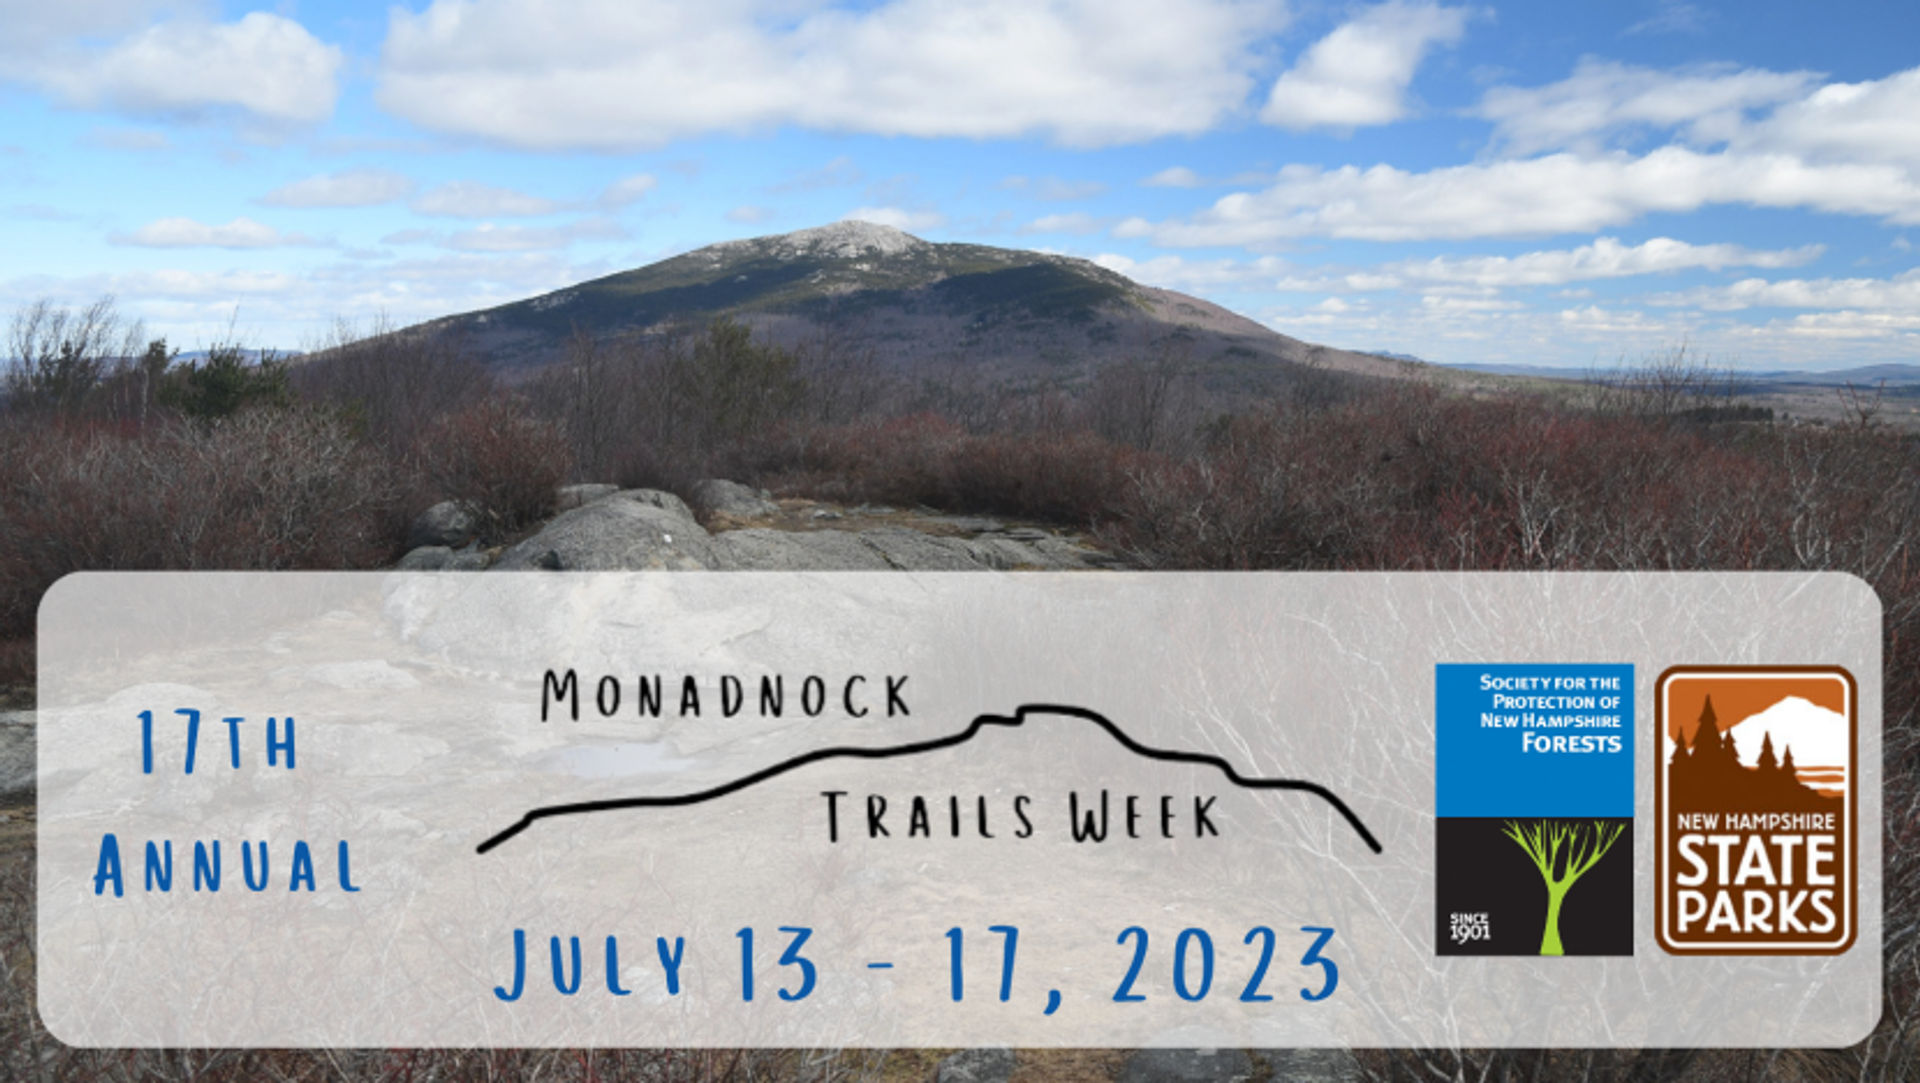 A photo of the Mt Monadnock summit in the distance with the logos of the Forest Society and NH State Parks.